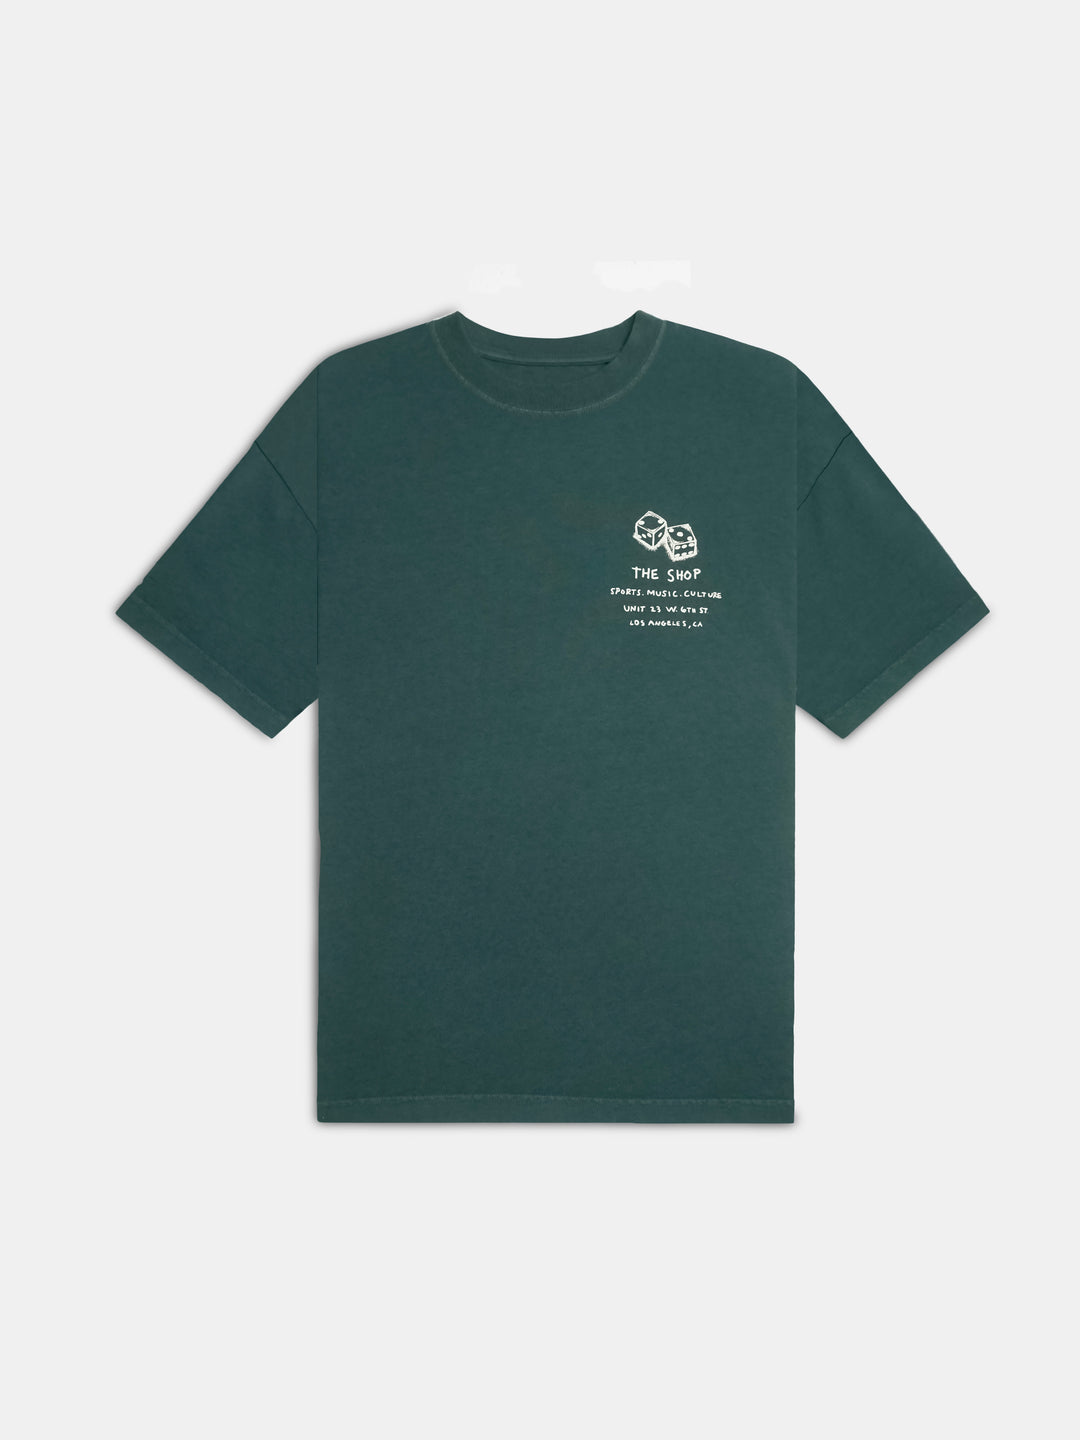 The Shop By Hand Tee Forest Green - Front